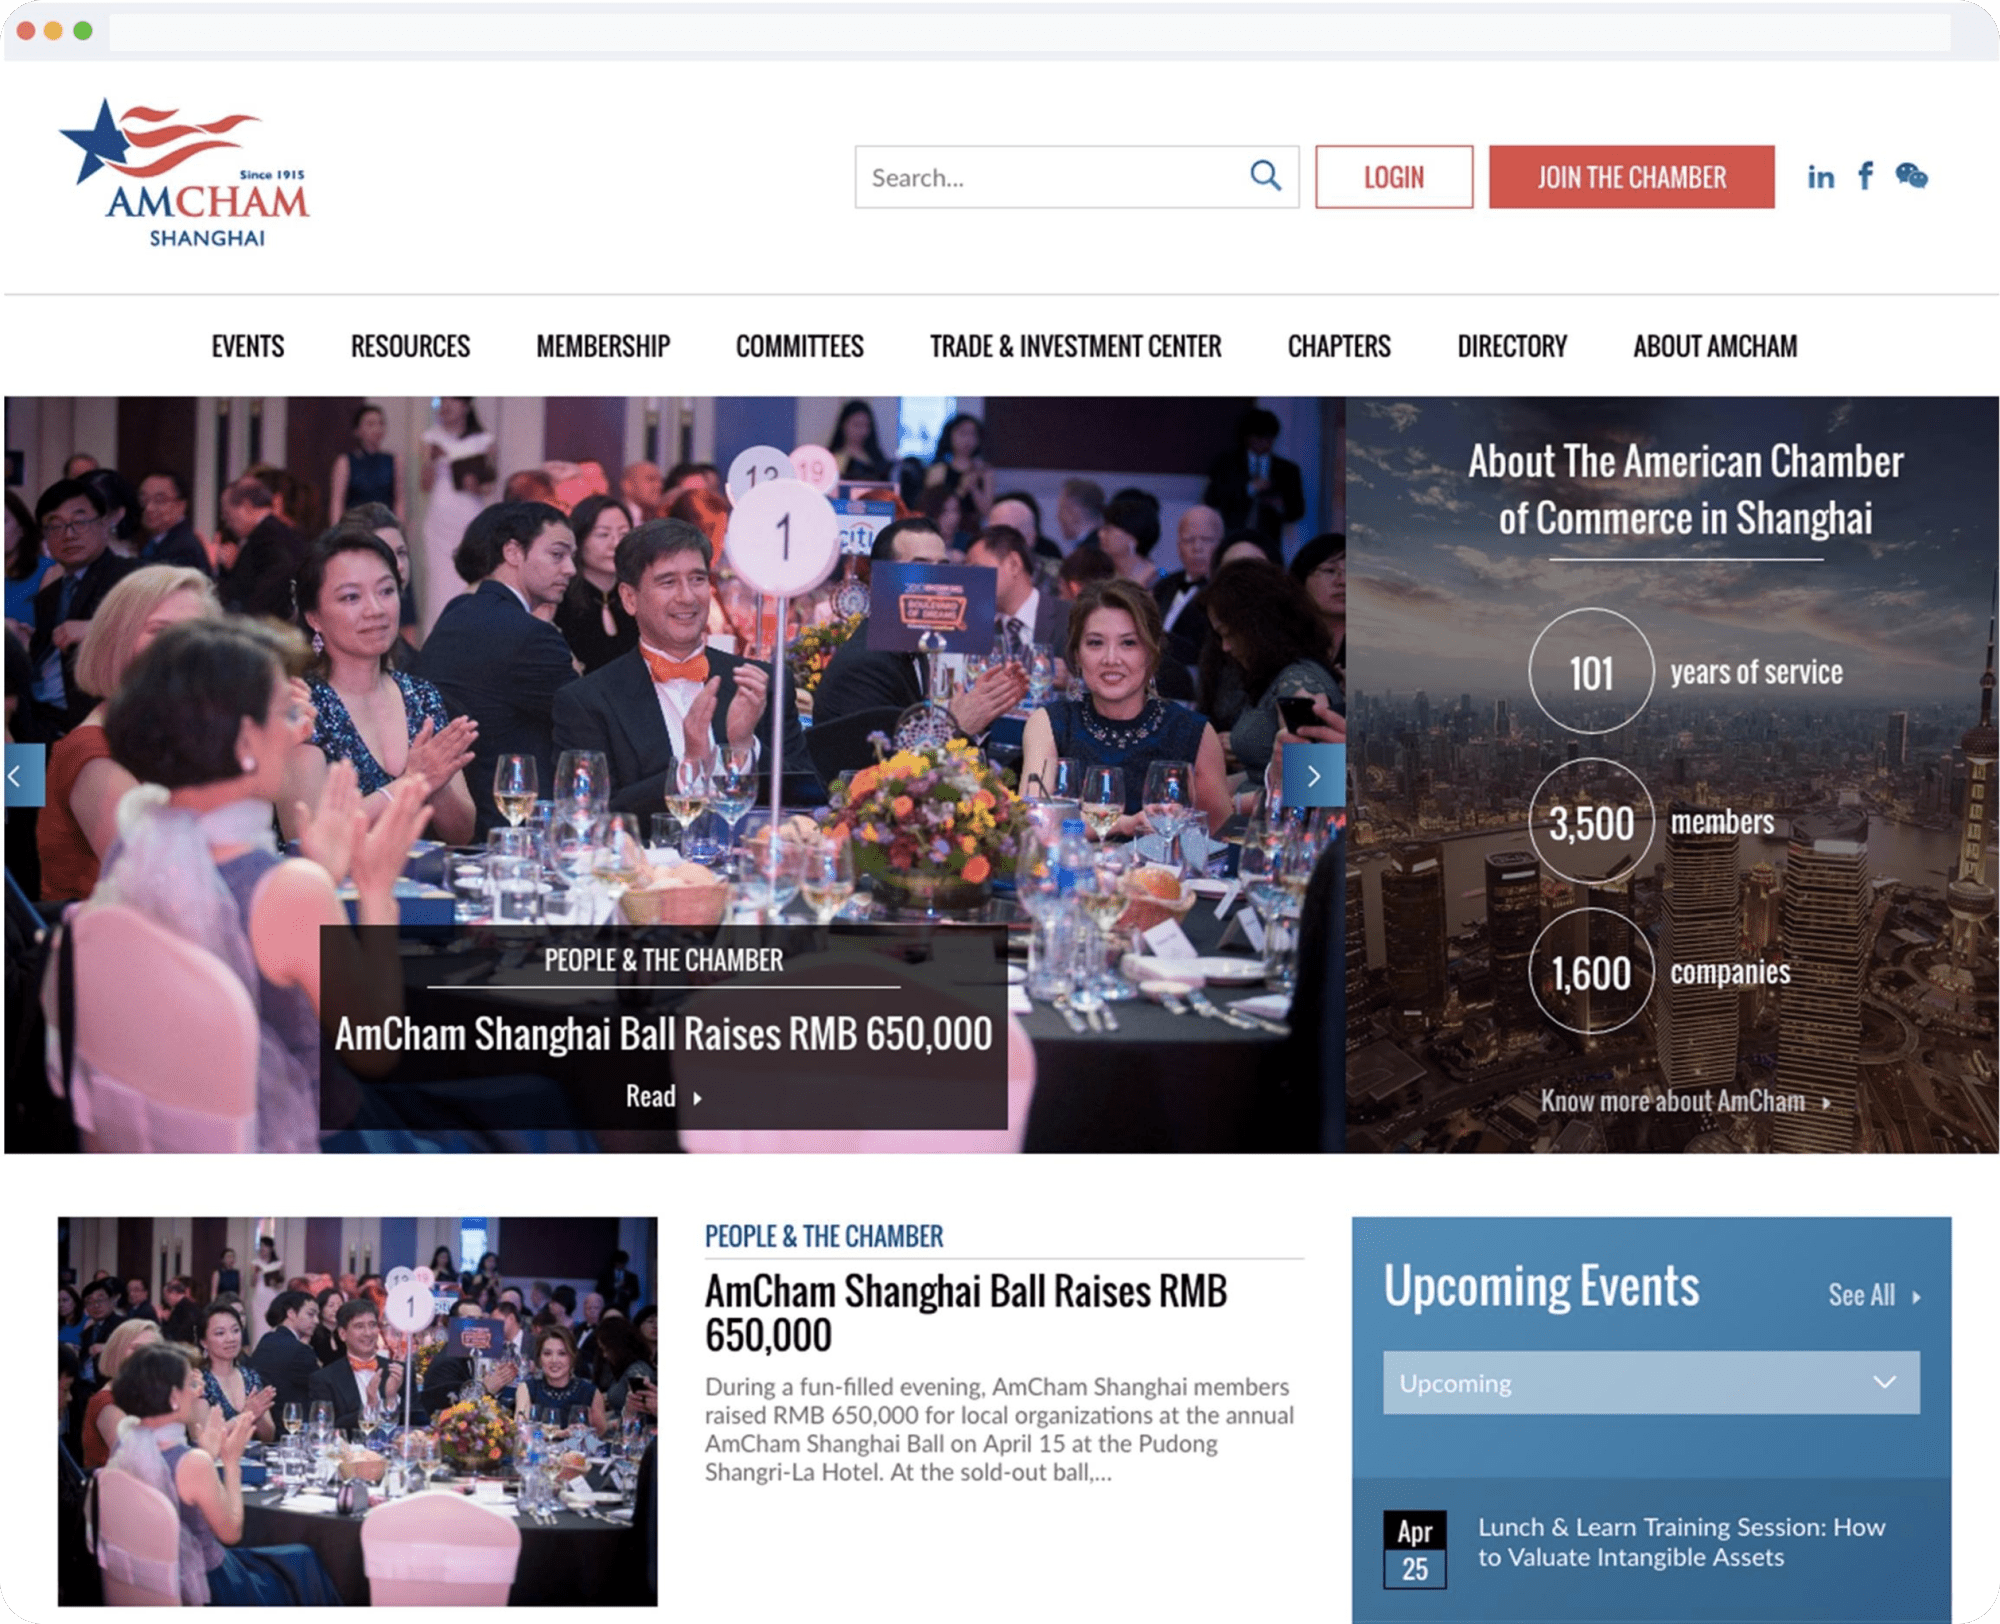 The homepage of the AmCham Shanghai website that IT Consultis developed